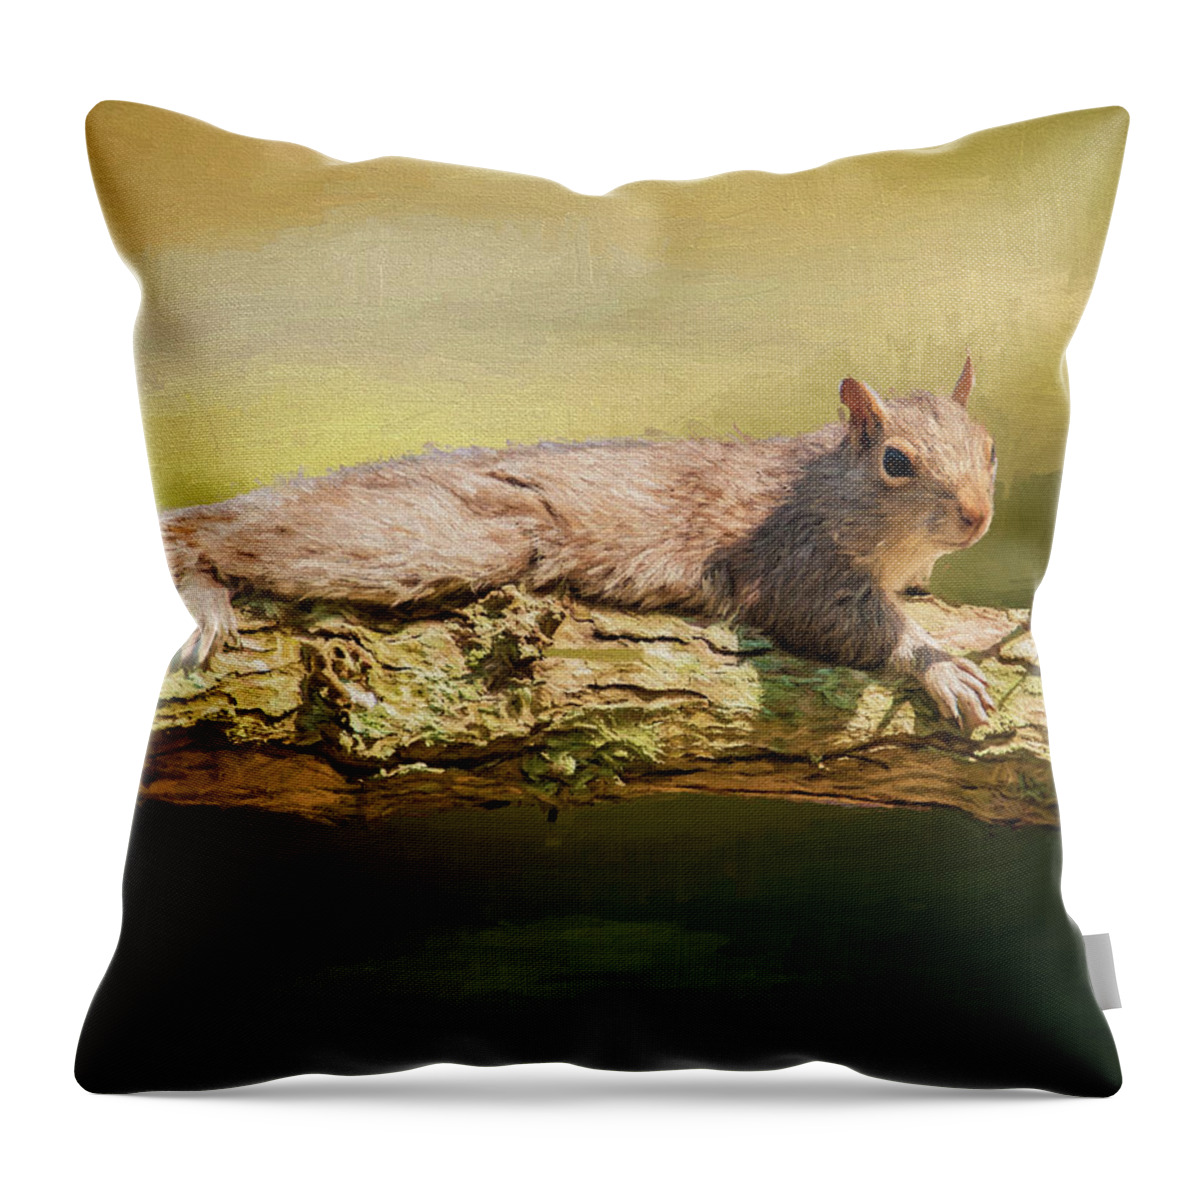 Squirrel Throw Pillow featuring the photograph Chilling In The Trees by Cathy Kovarik